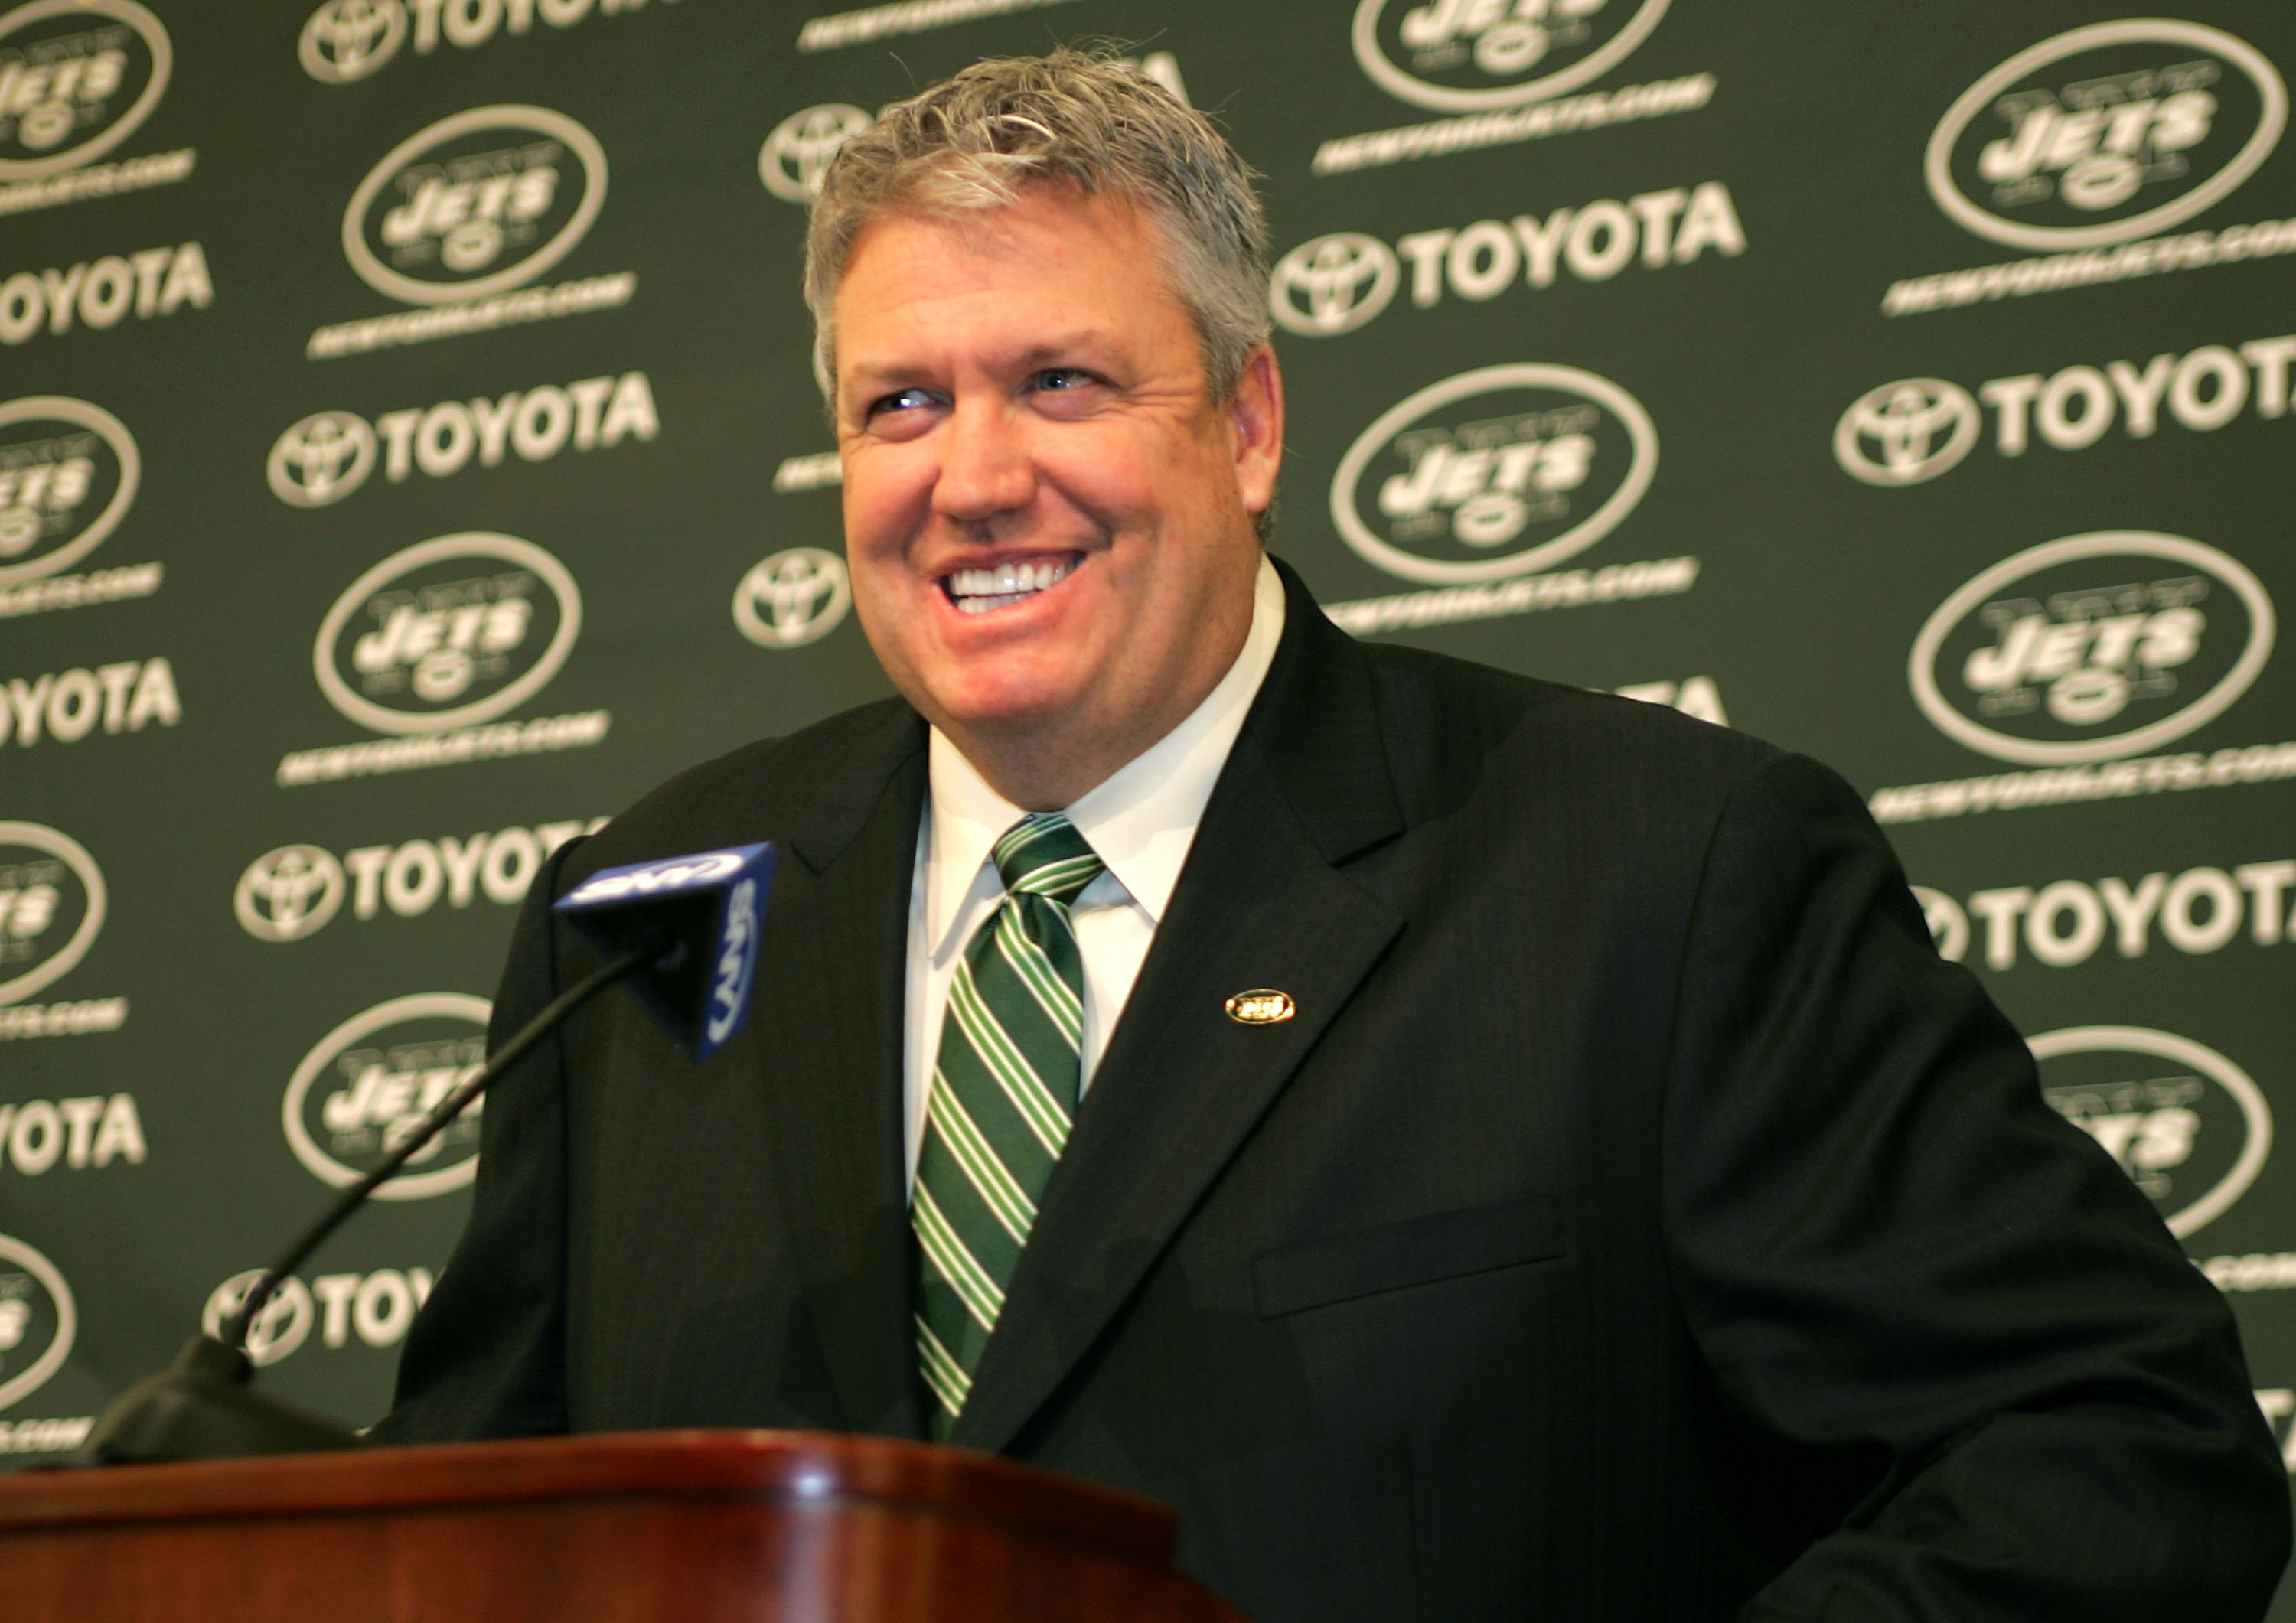 Rex Ryan addresses the media after being introduced as head coach of the New York Jets on January 21, 2009.  (Photo by Andy Marlin/Getty Images)